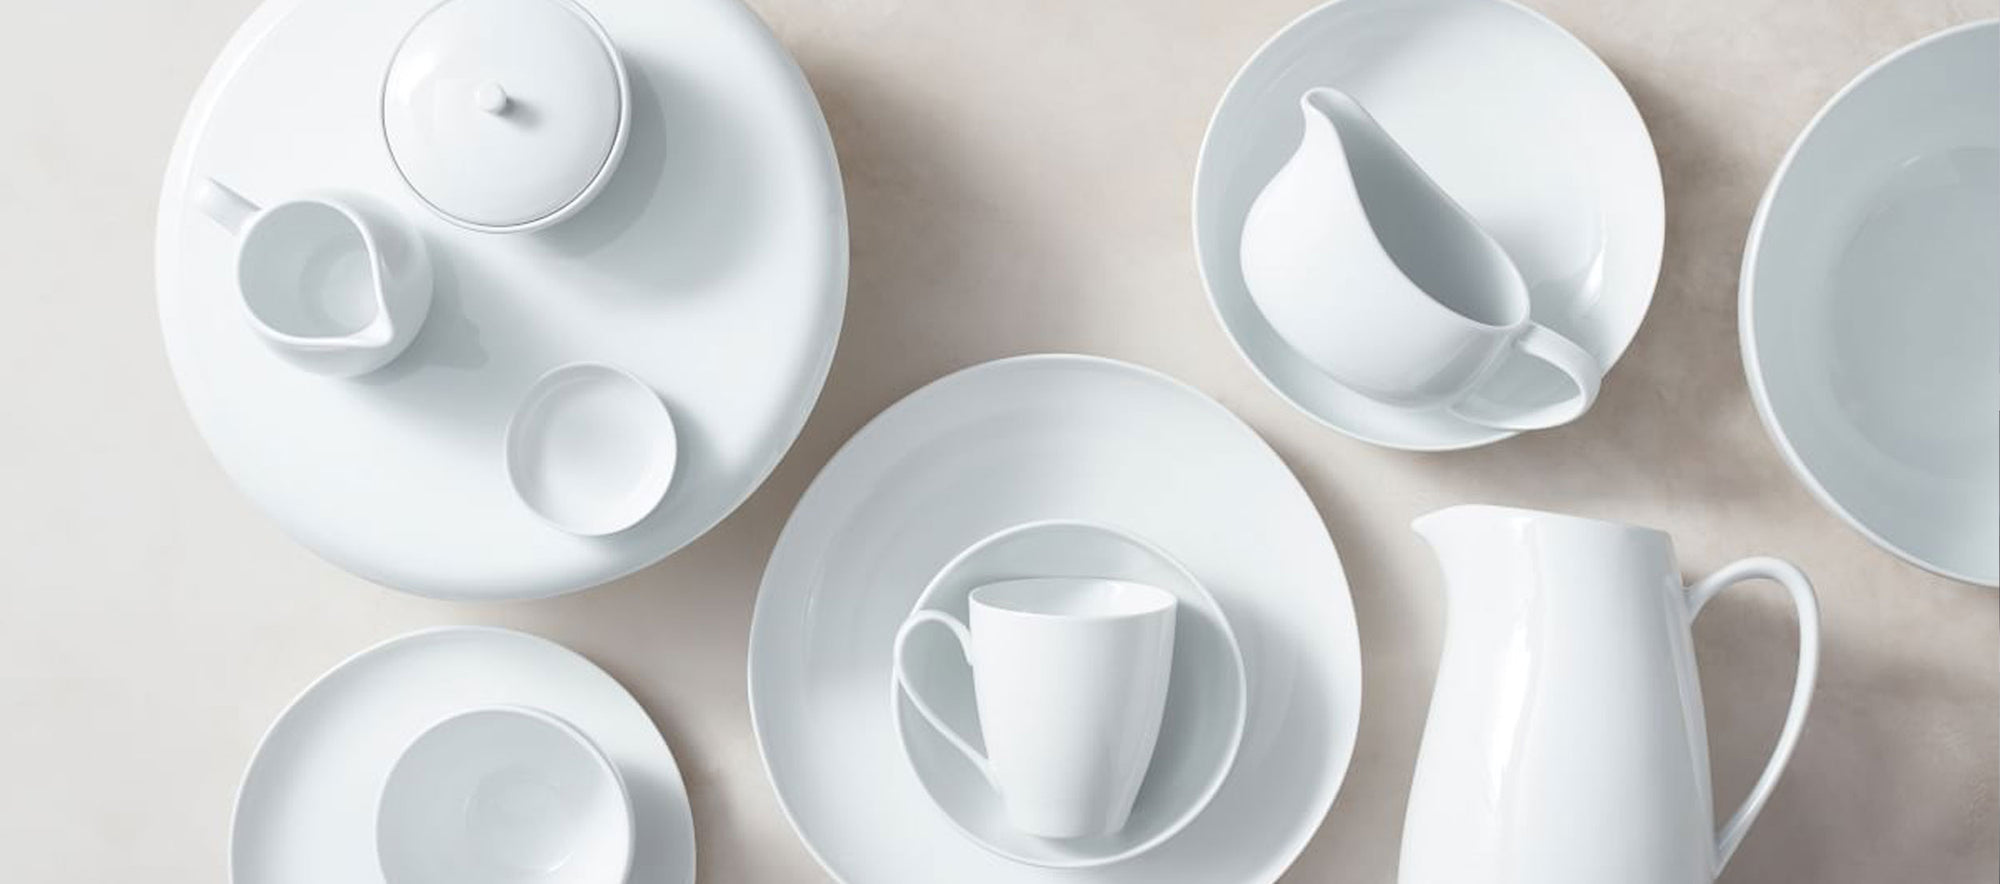 7 Important Things to Consider When Shopping for New Dinnerware